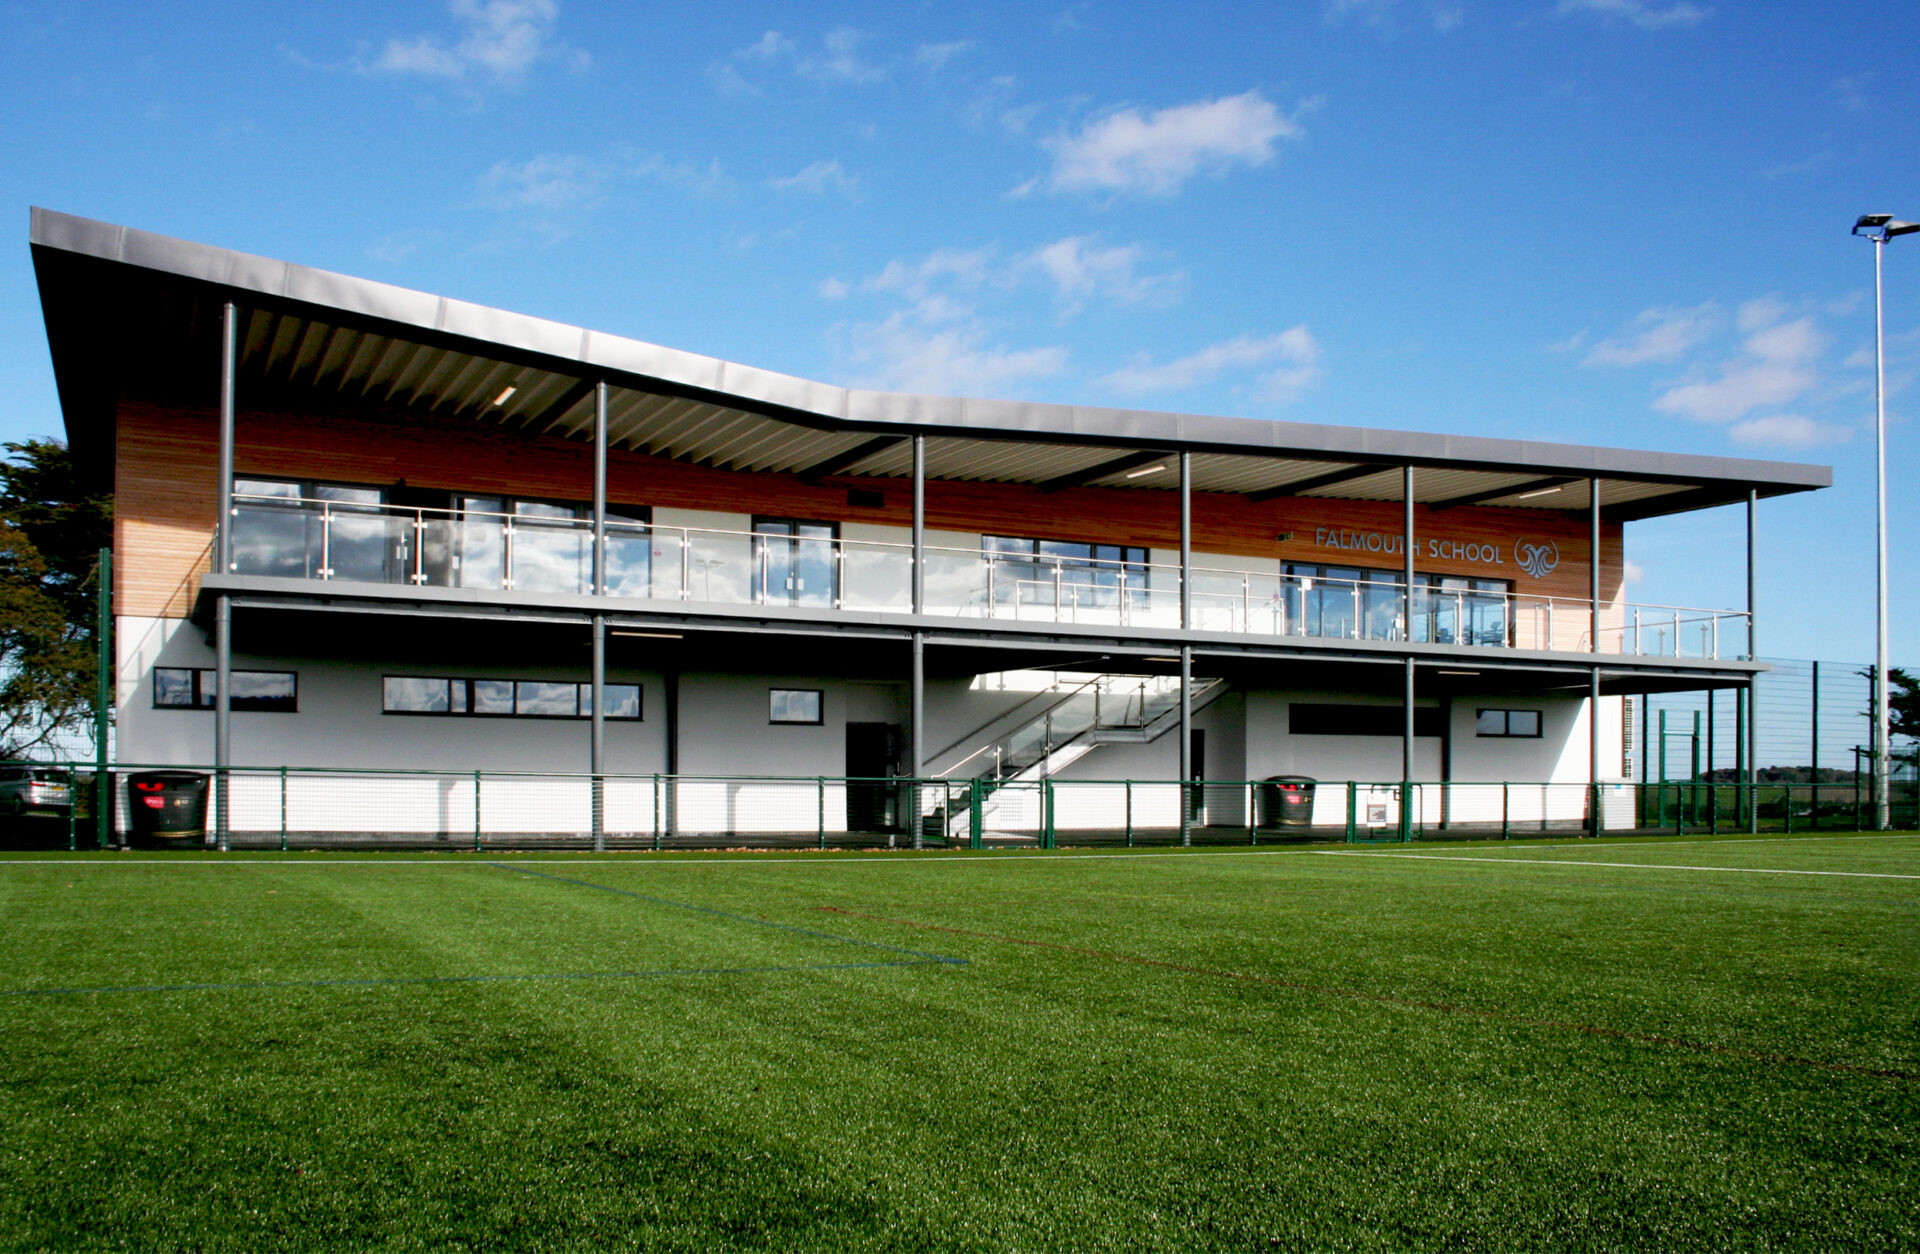 Sports pavillion at Falmouth School from the pitch.